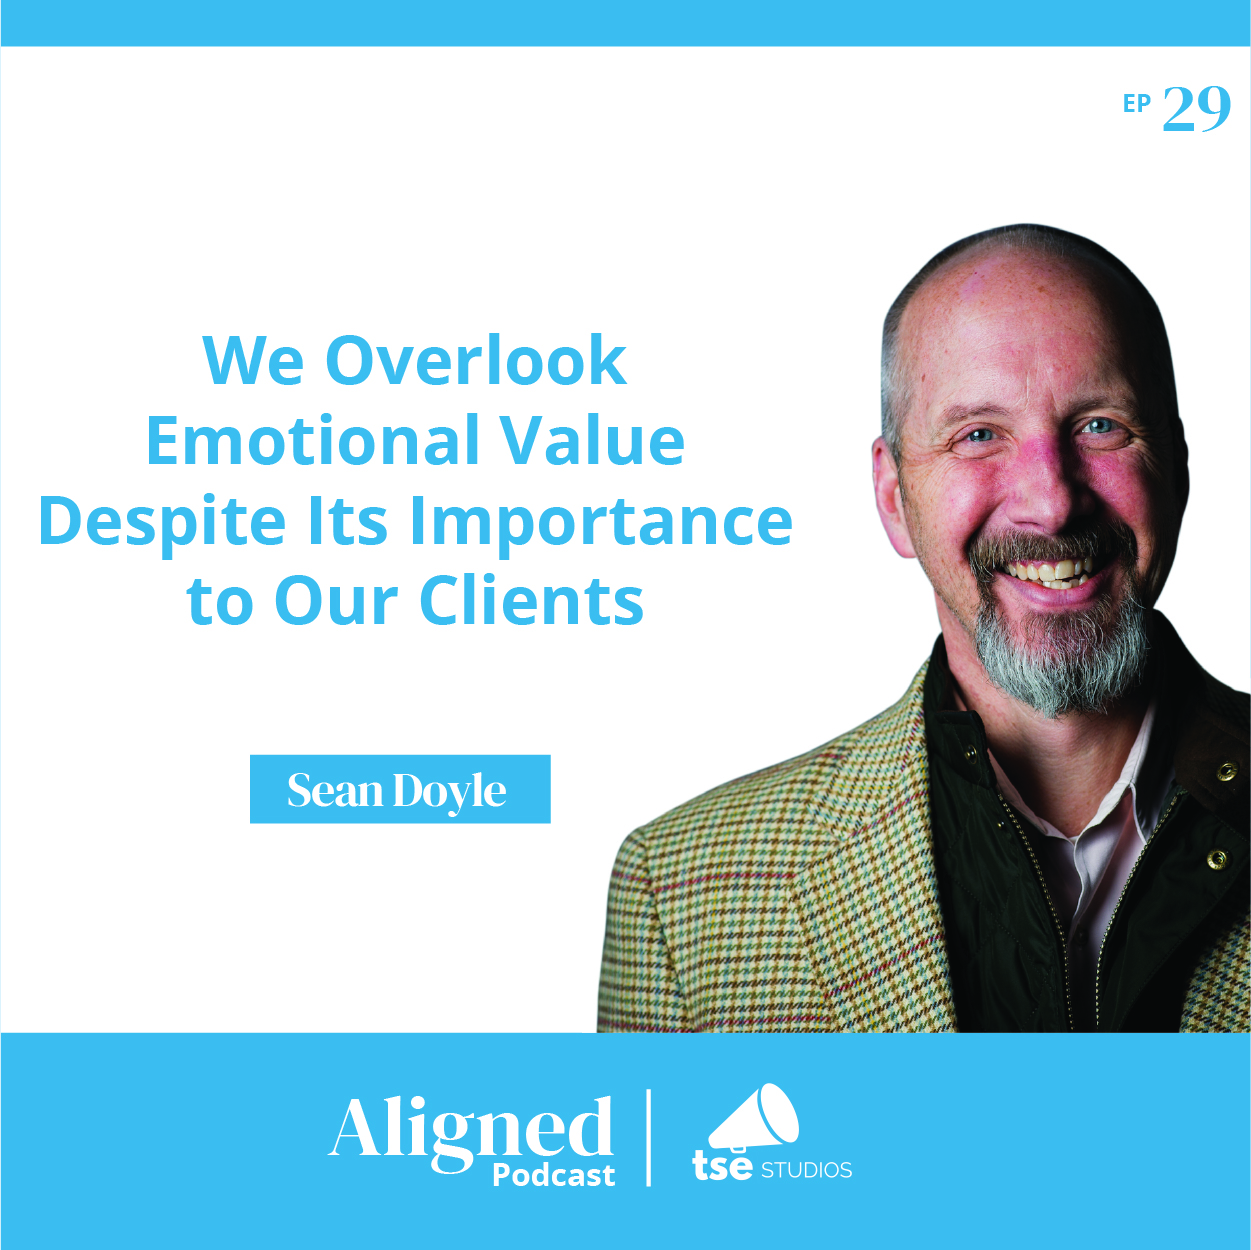 We Overlook Emotional Value Despite Its Importance to Our Clients